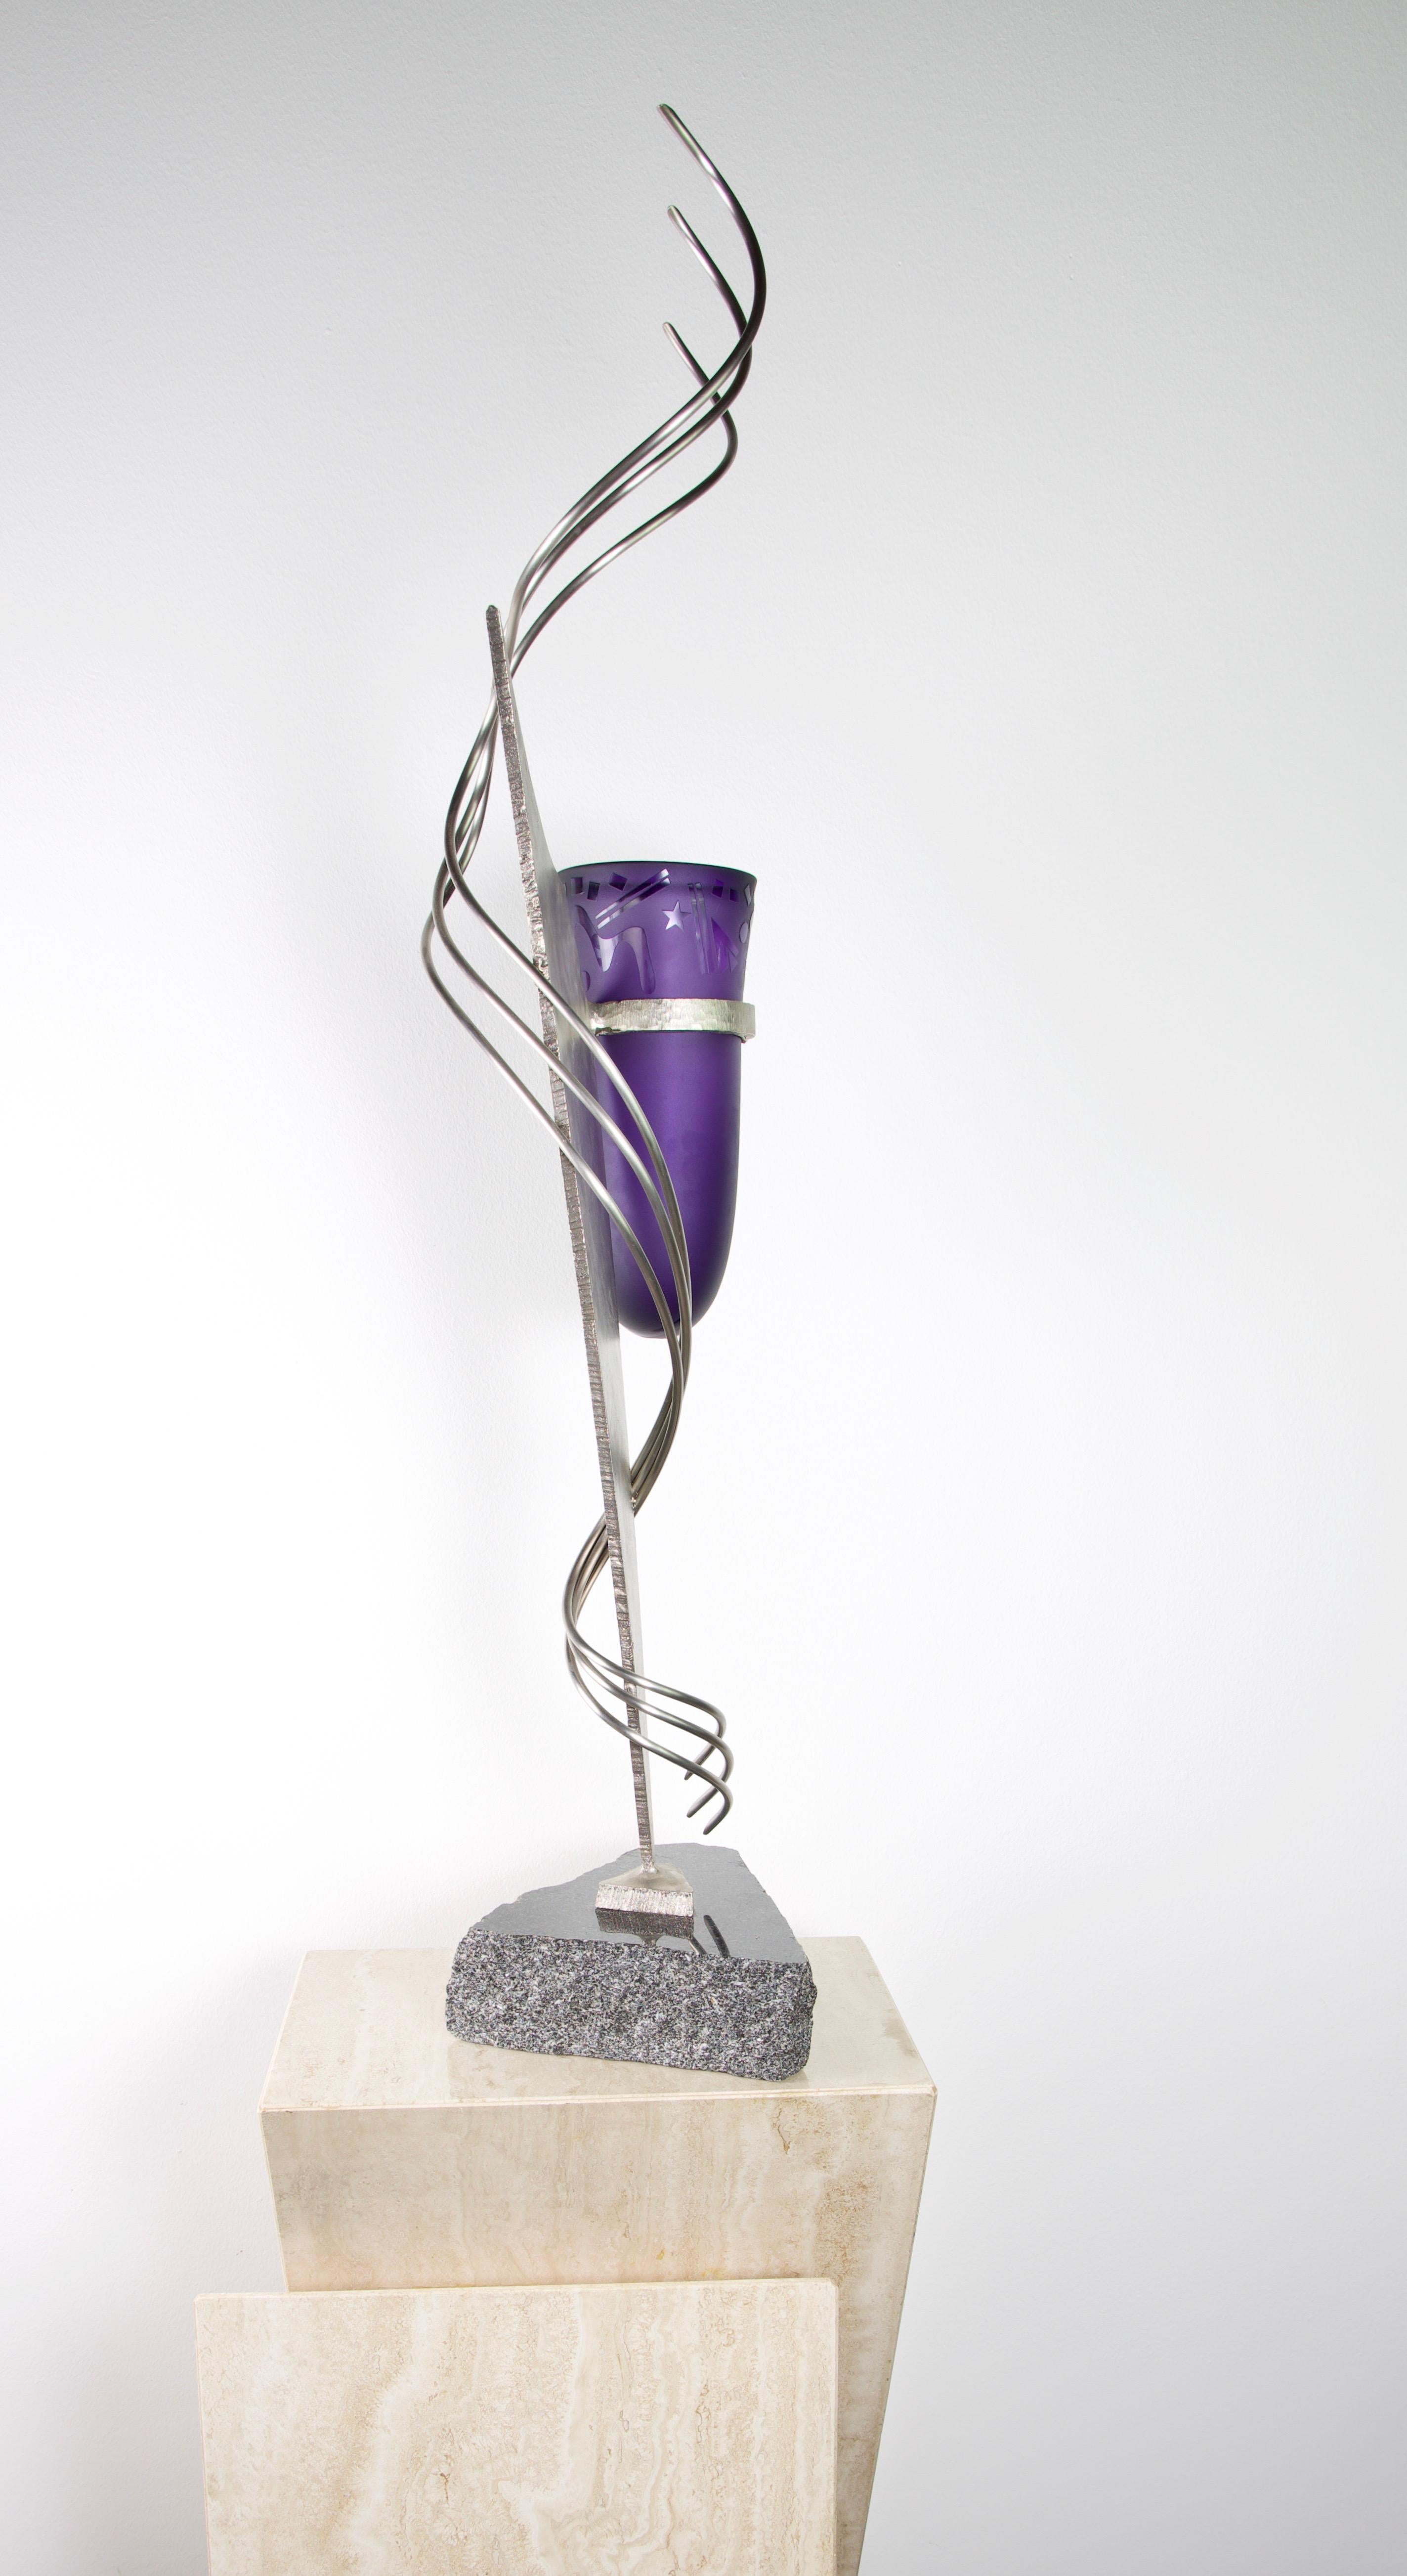 Modern Art Glass and Stainless Steel Sculpture, by Loretta Eby and Jeff Jackson